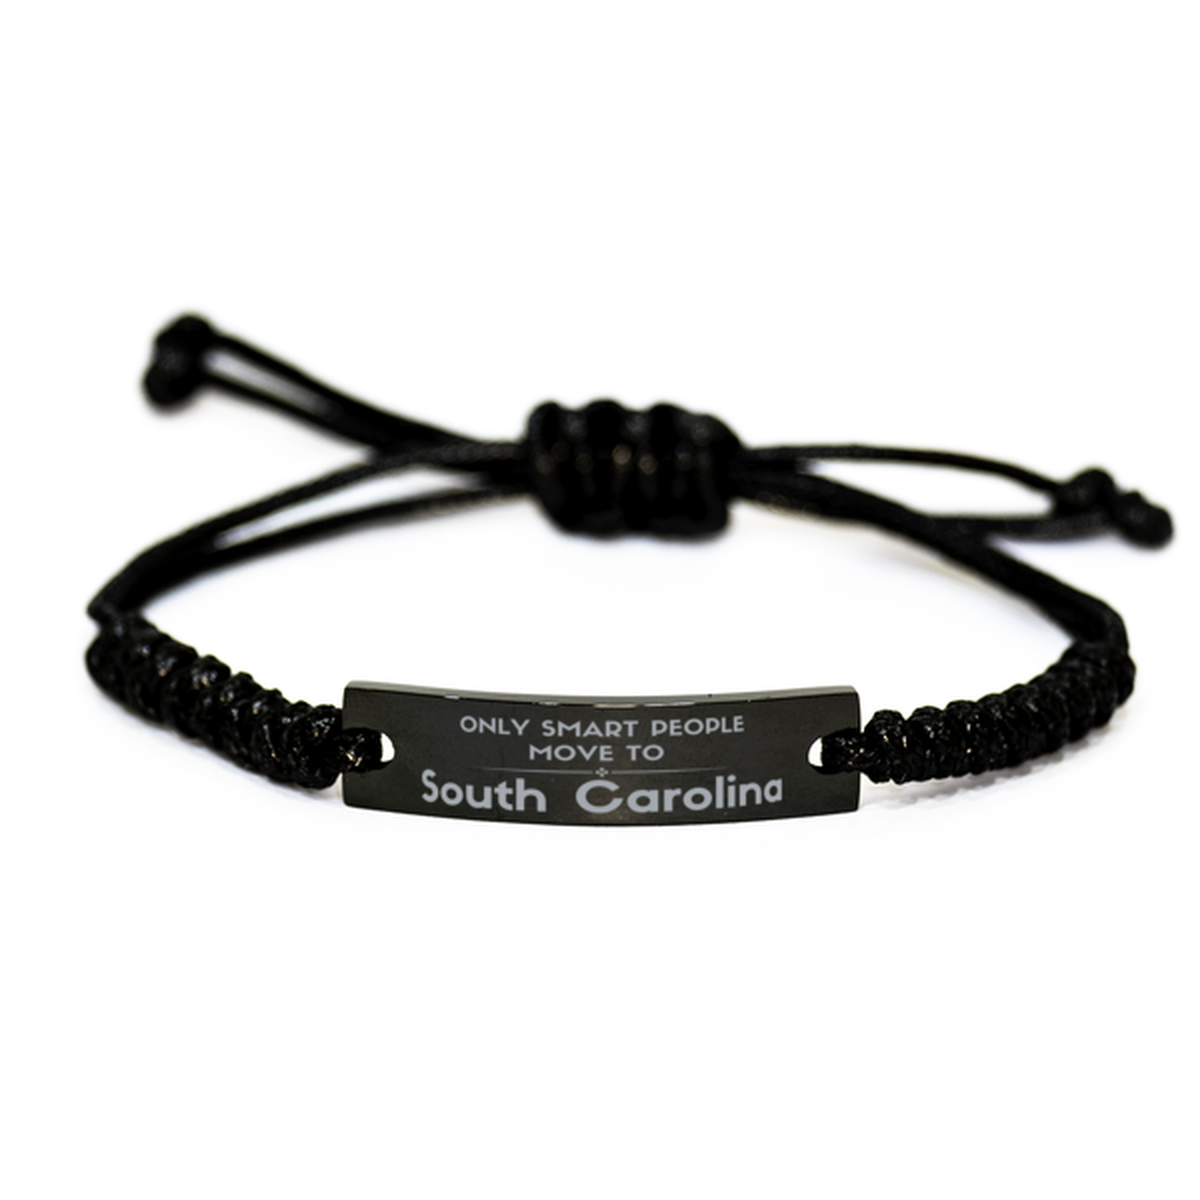 Only smart people move to South Carolina Black Rope Bracelet, Gag Gifts For South Carolina, Move to South Carolina Gifts for Friends Coworker Funny Saying Quote